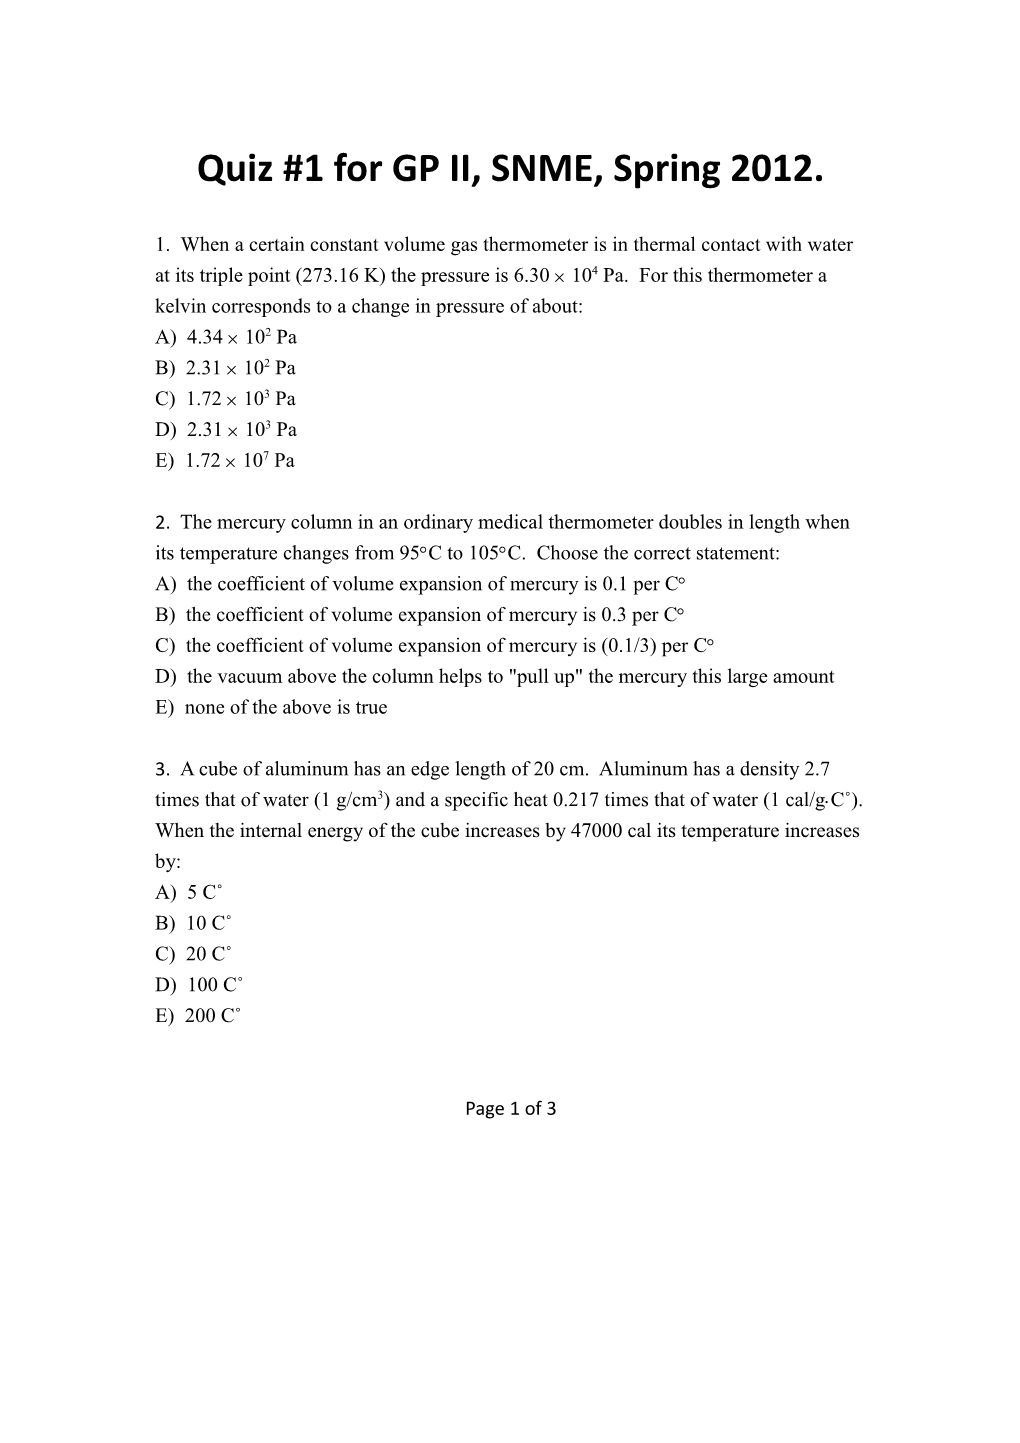 Quiz #1 for GP II, SNME, Spring 2012